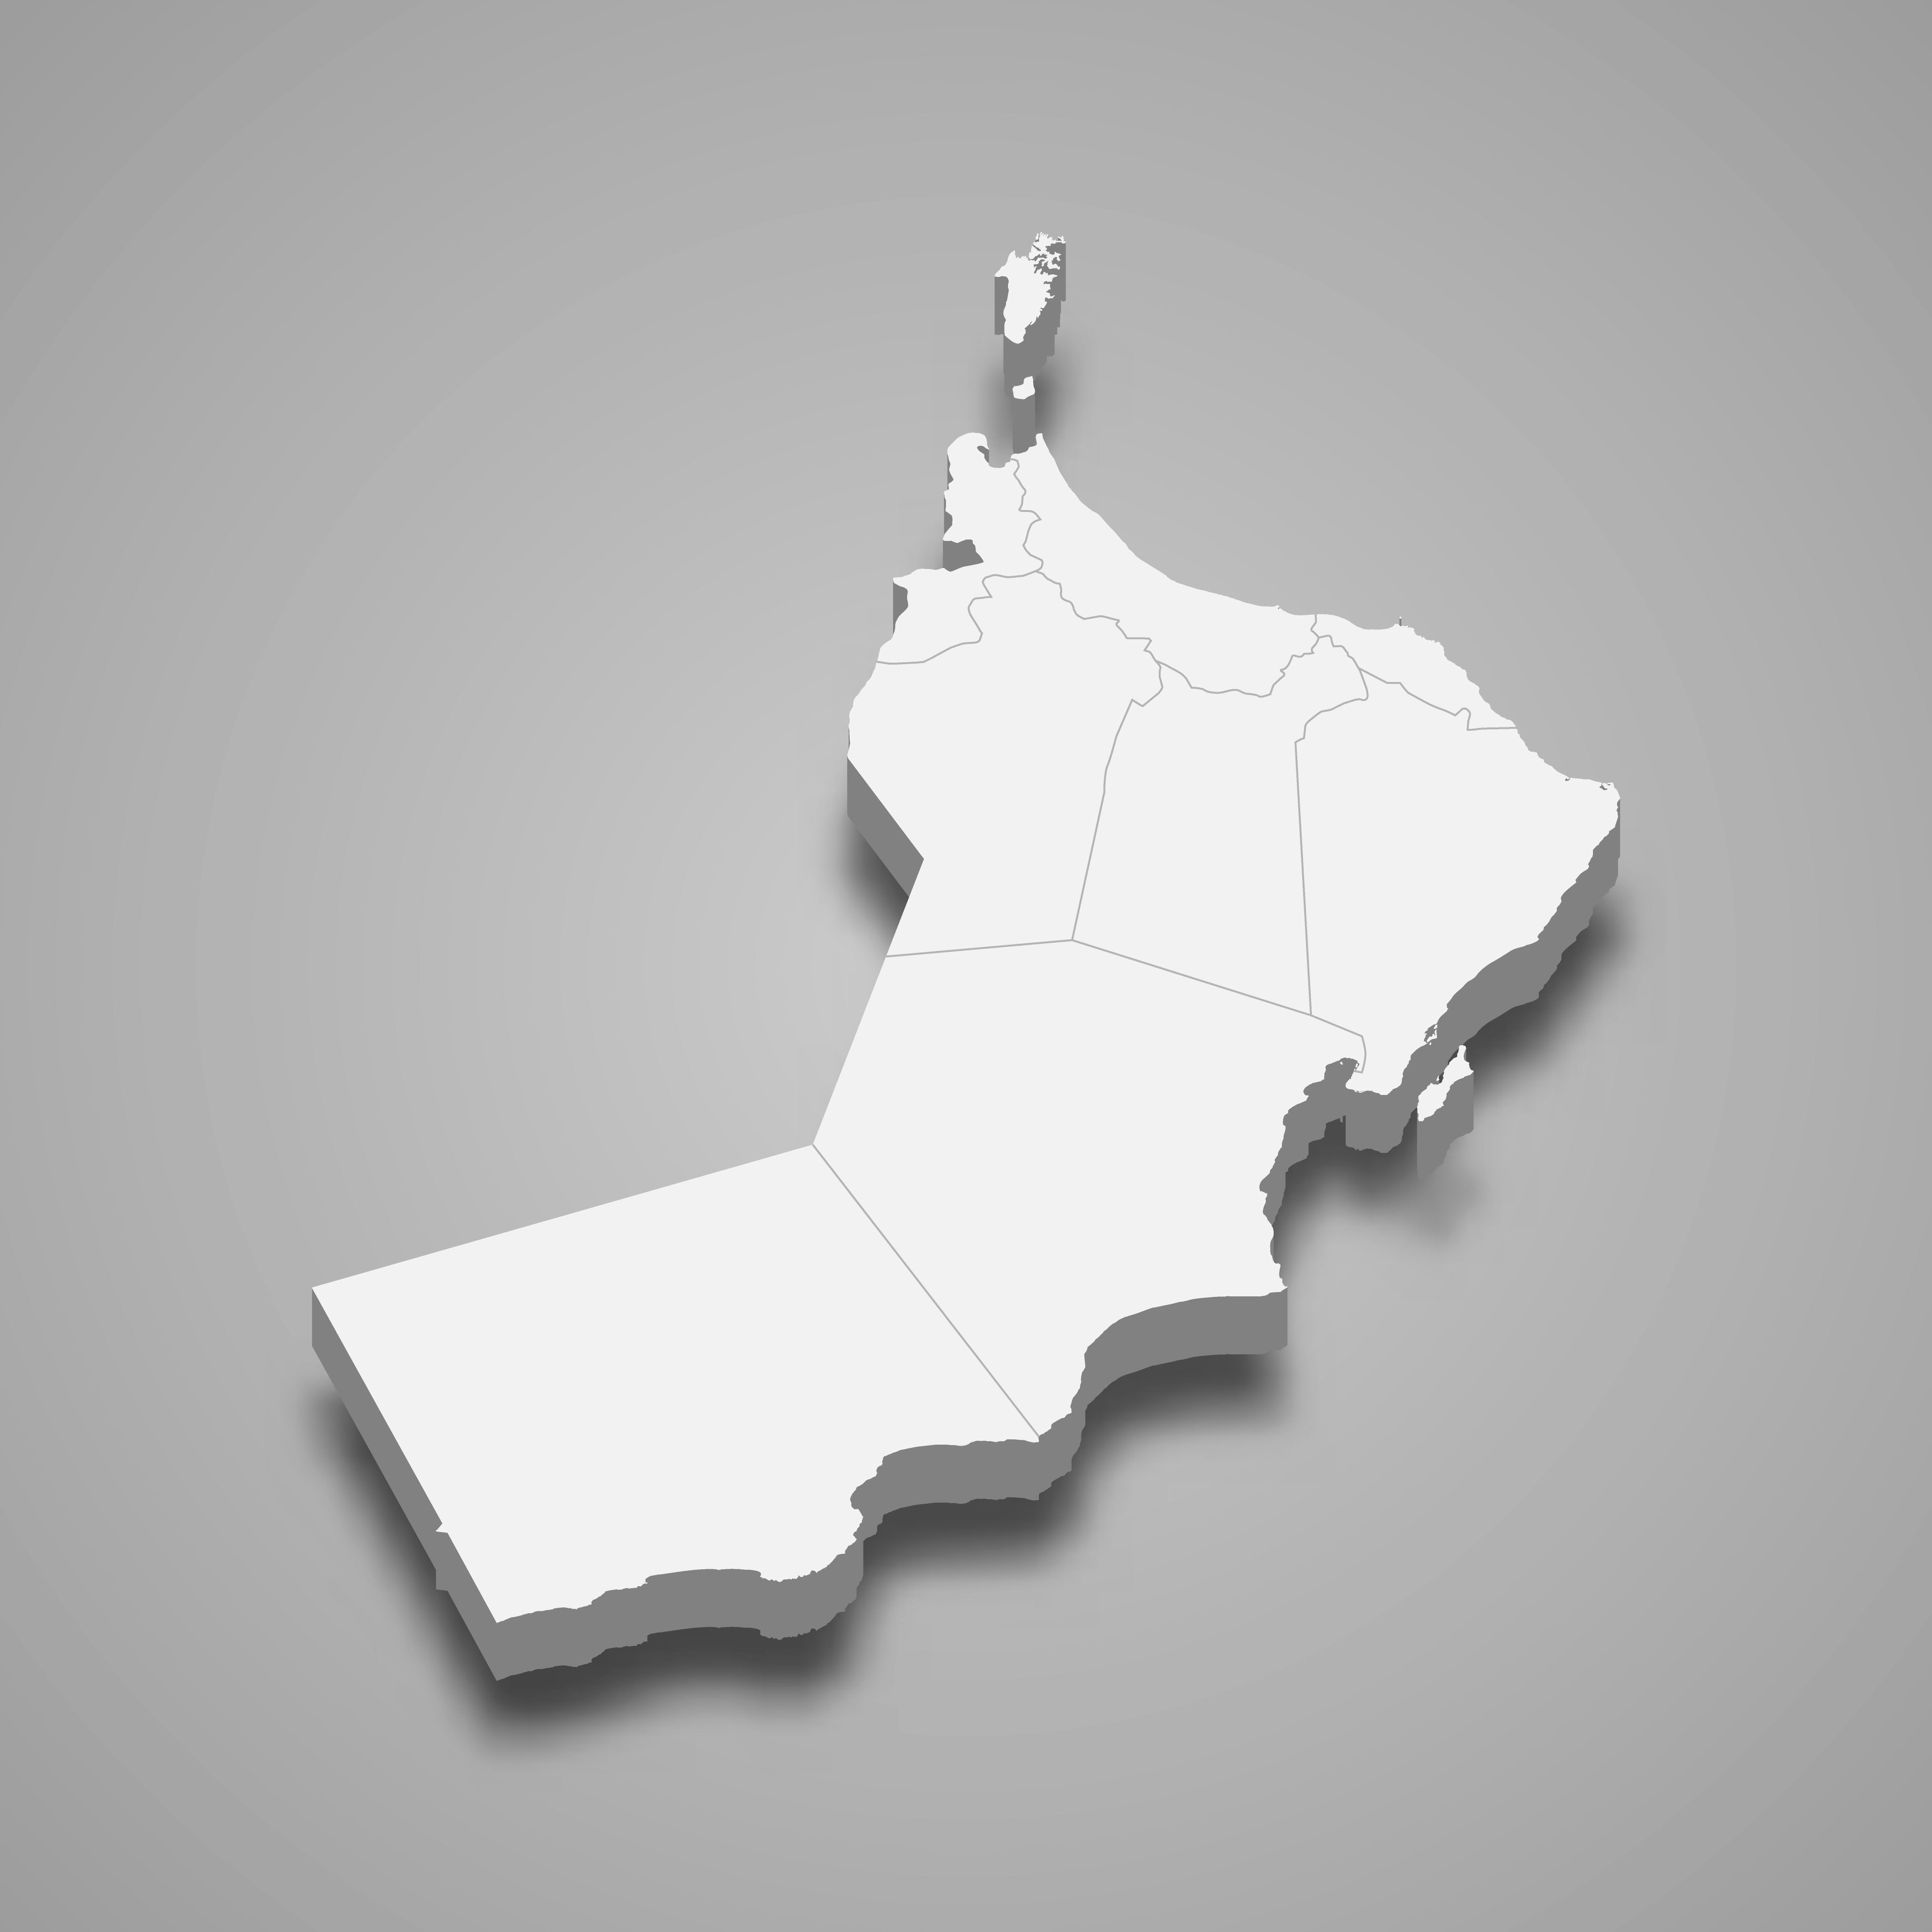 3d map of Oman with borders of regions. 3d map with borders Template for your design